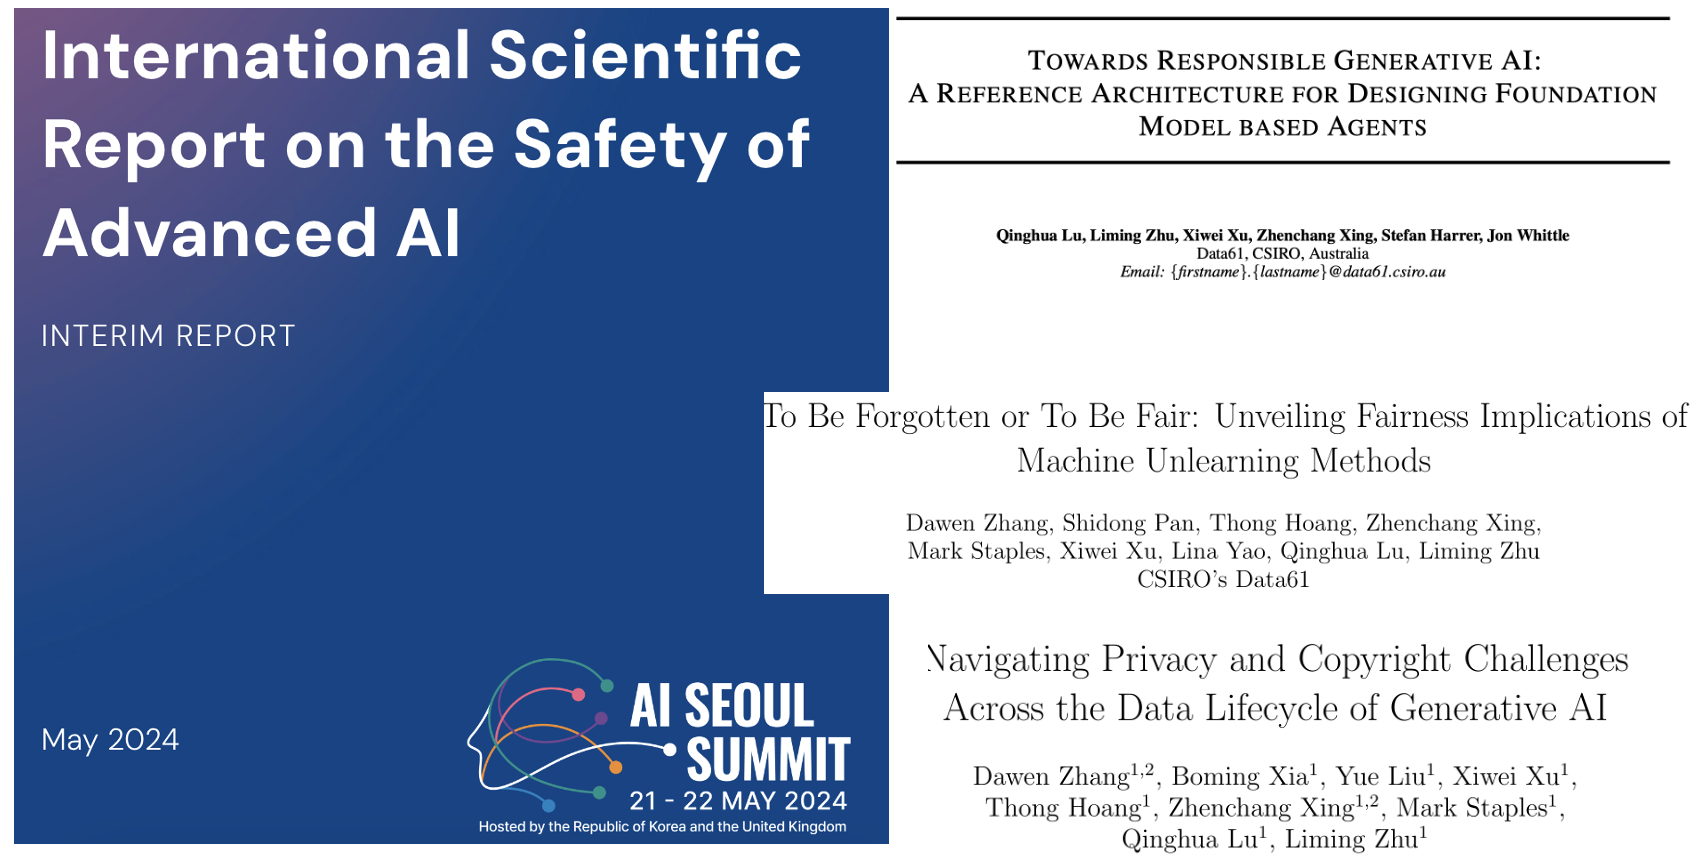 Our Pioneering AI Safety Work Featured in the Latest Scientific Report